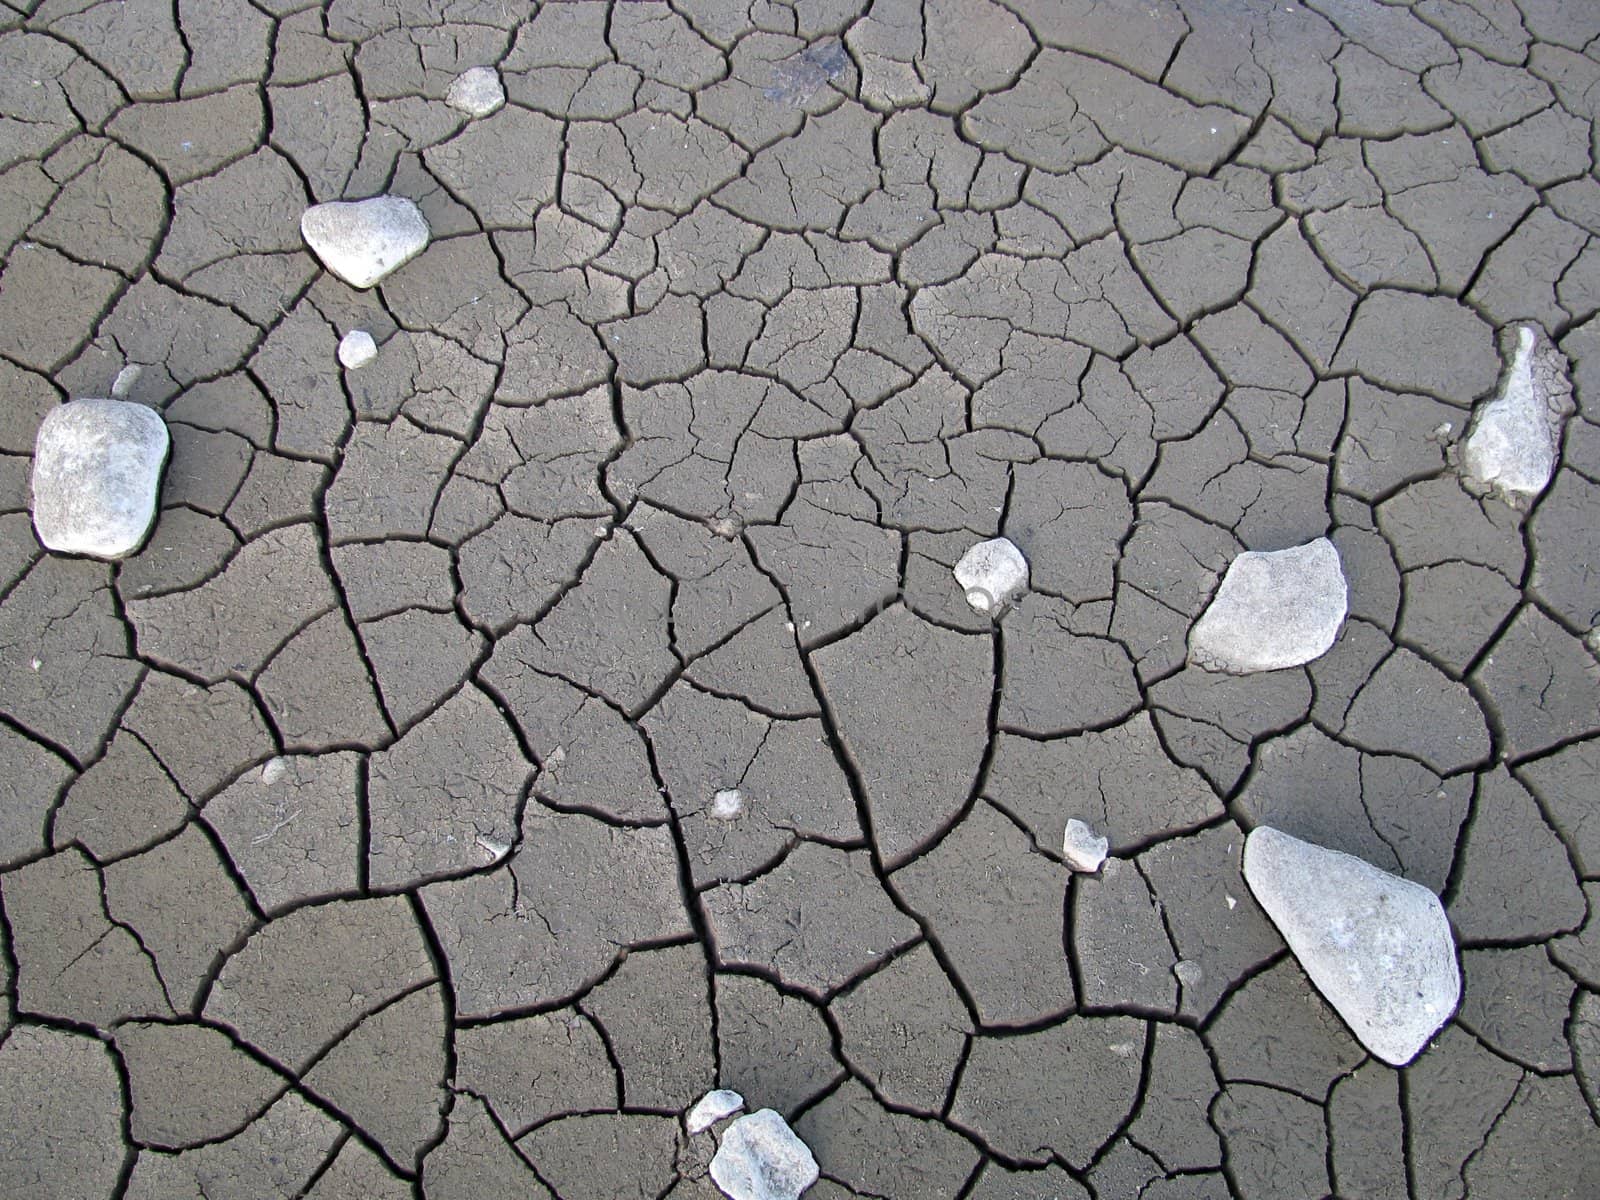 Background, the earth, soil, structure, structure, crack, bark, stones, the invoice, the nature, ground, drought, a heat, a relief, a kind, grey, dry